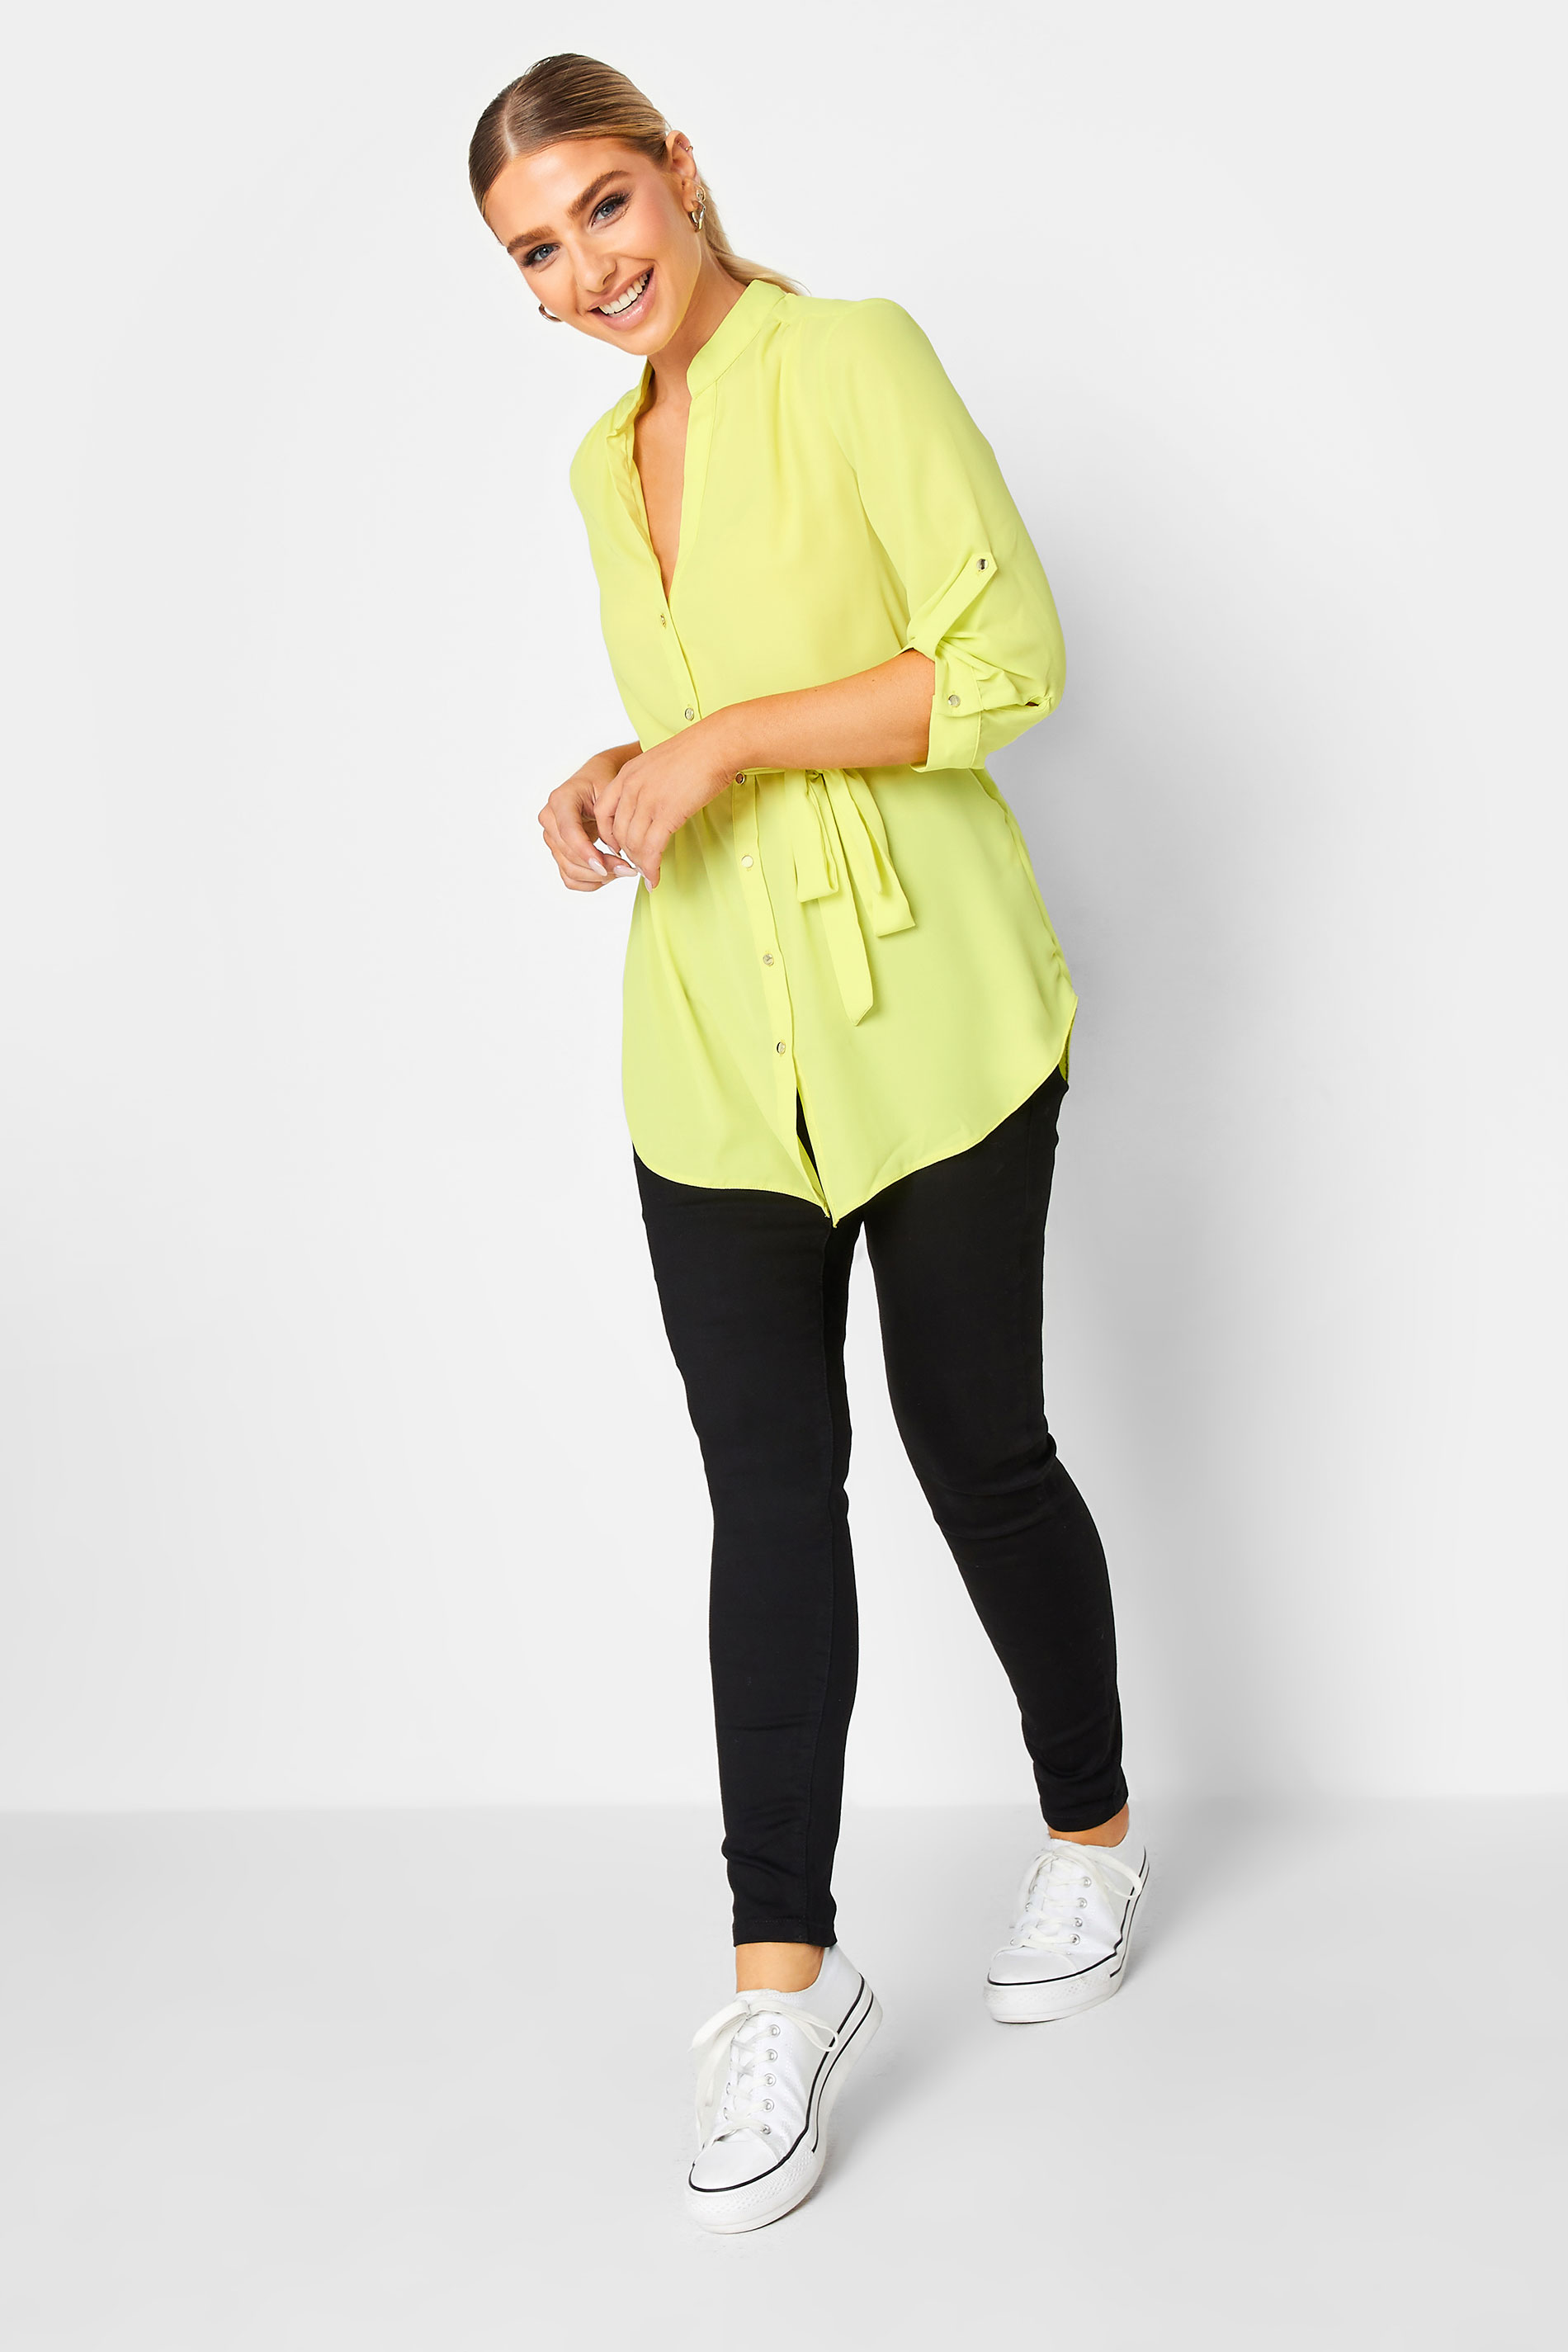 M&Co Lime Green Tie Waist Blouse | M&Co 2